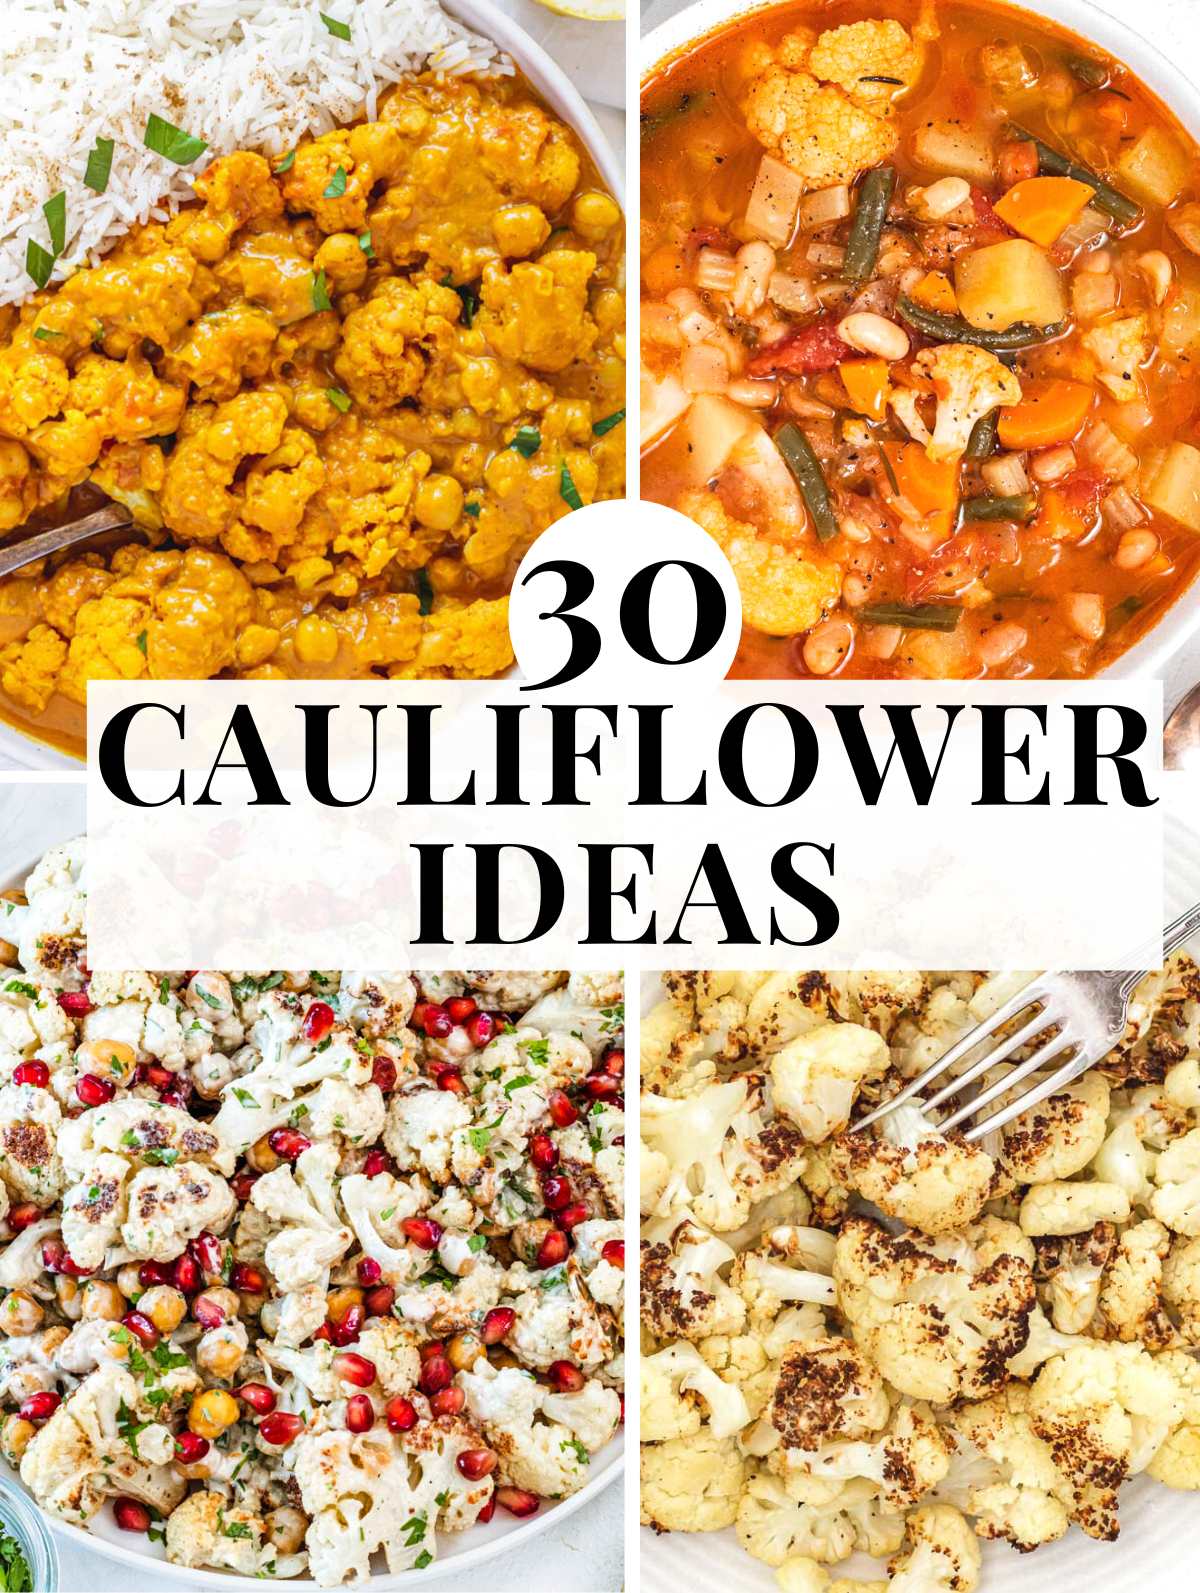 Vegan cauliflower recipes with soups, salads, curries